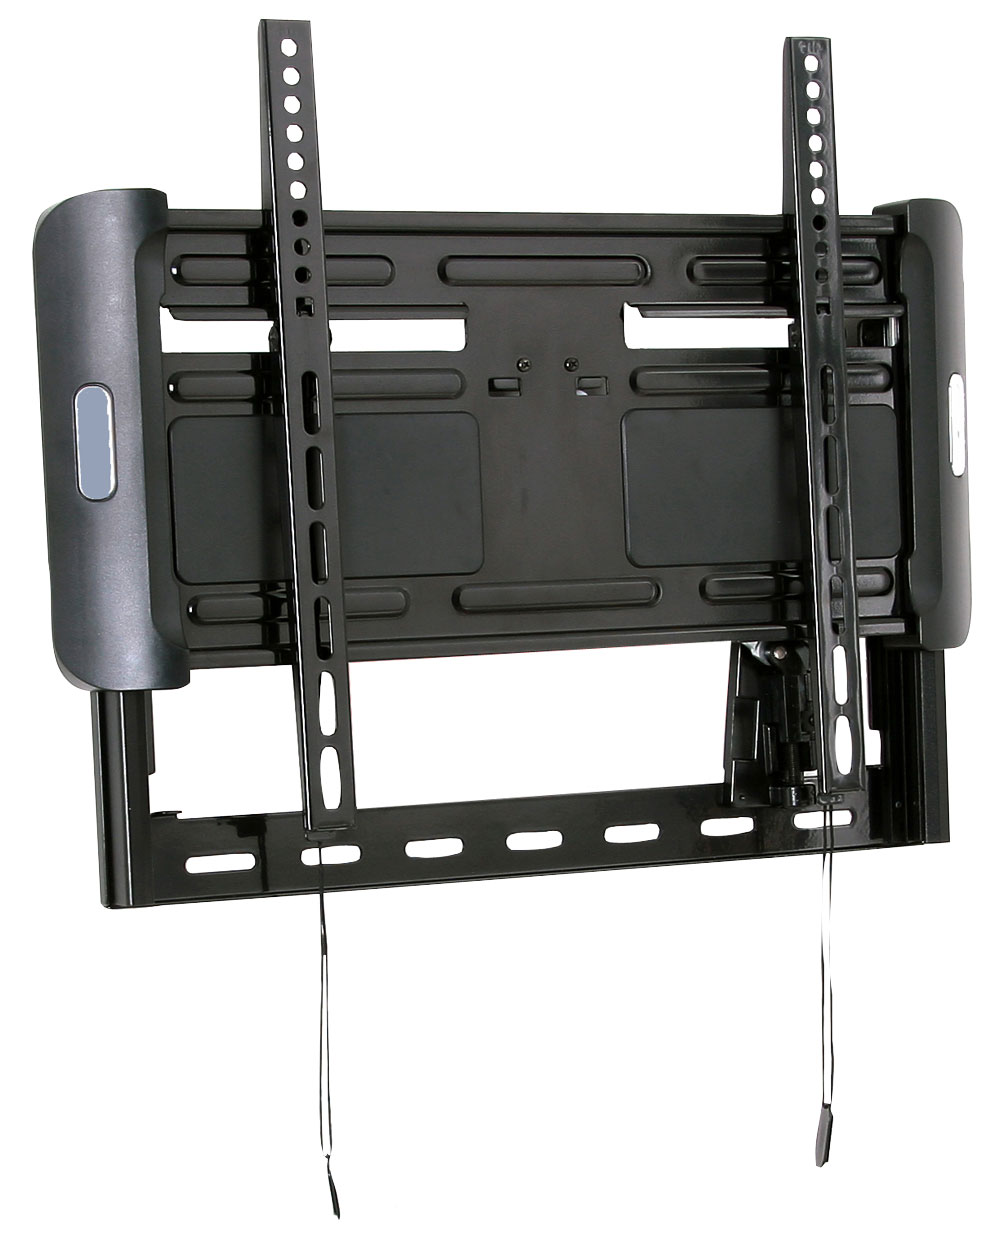 PYLE PSW681MF1 - Universal TV Mount - fits virtually any 32'' to 47'' TVs including the latest Plasma, LED, LCD, 3D, Smart & other flat panel TVs - image 1 of 3